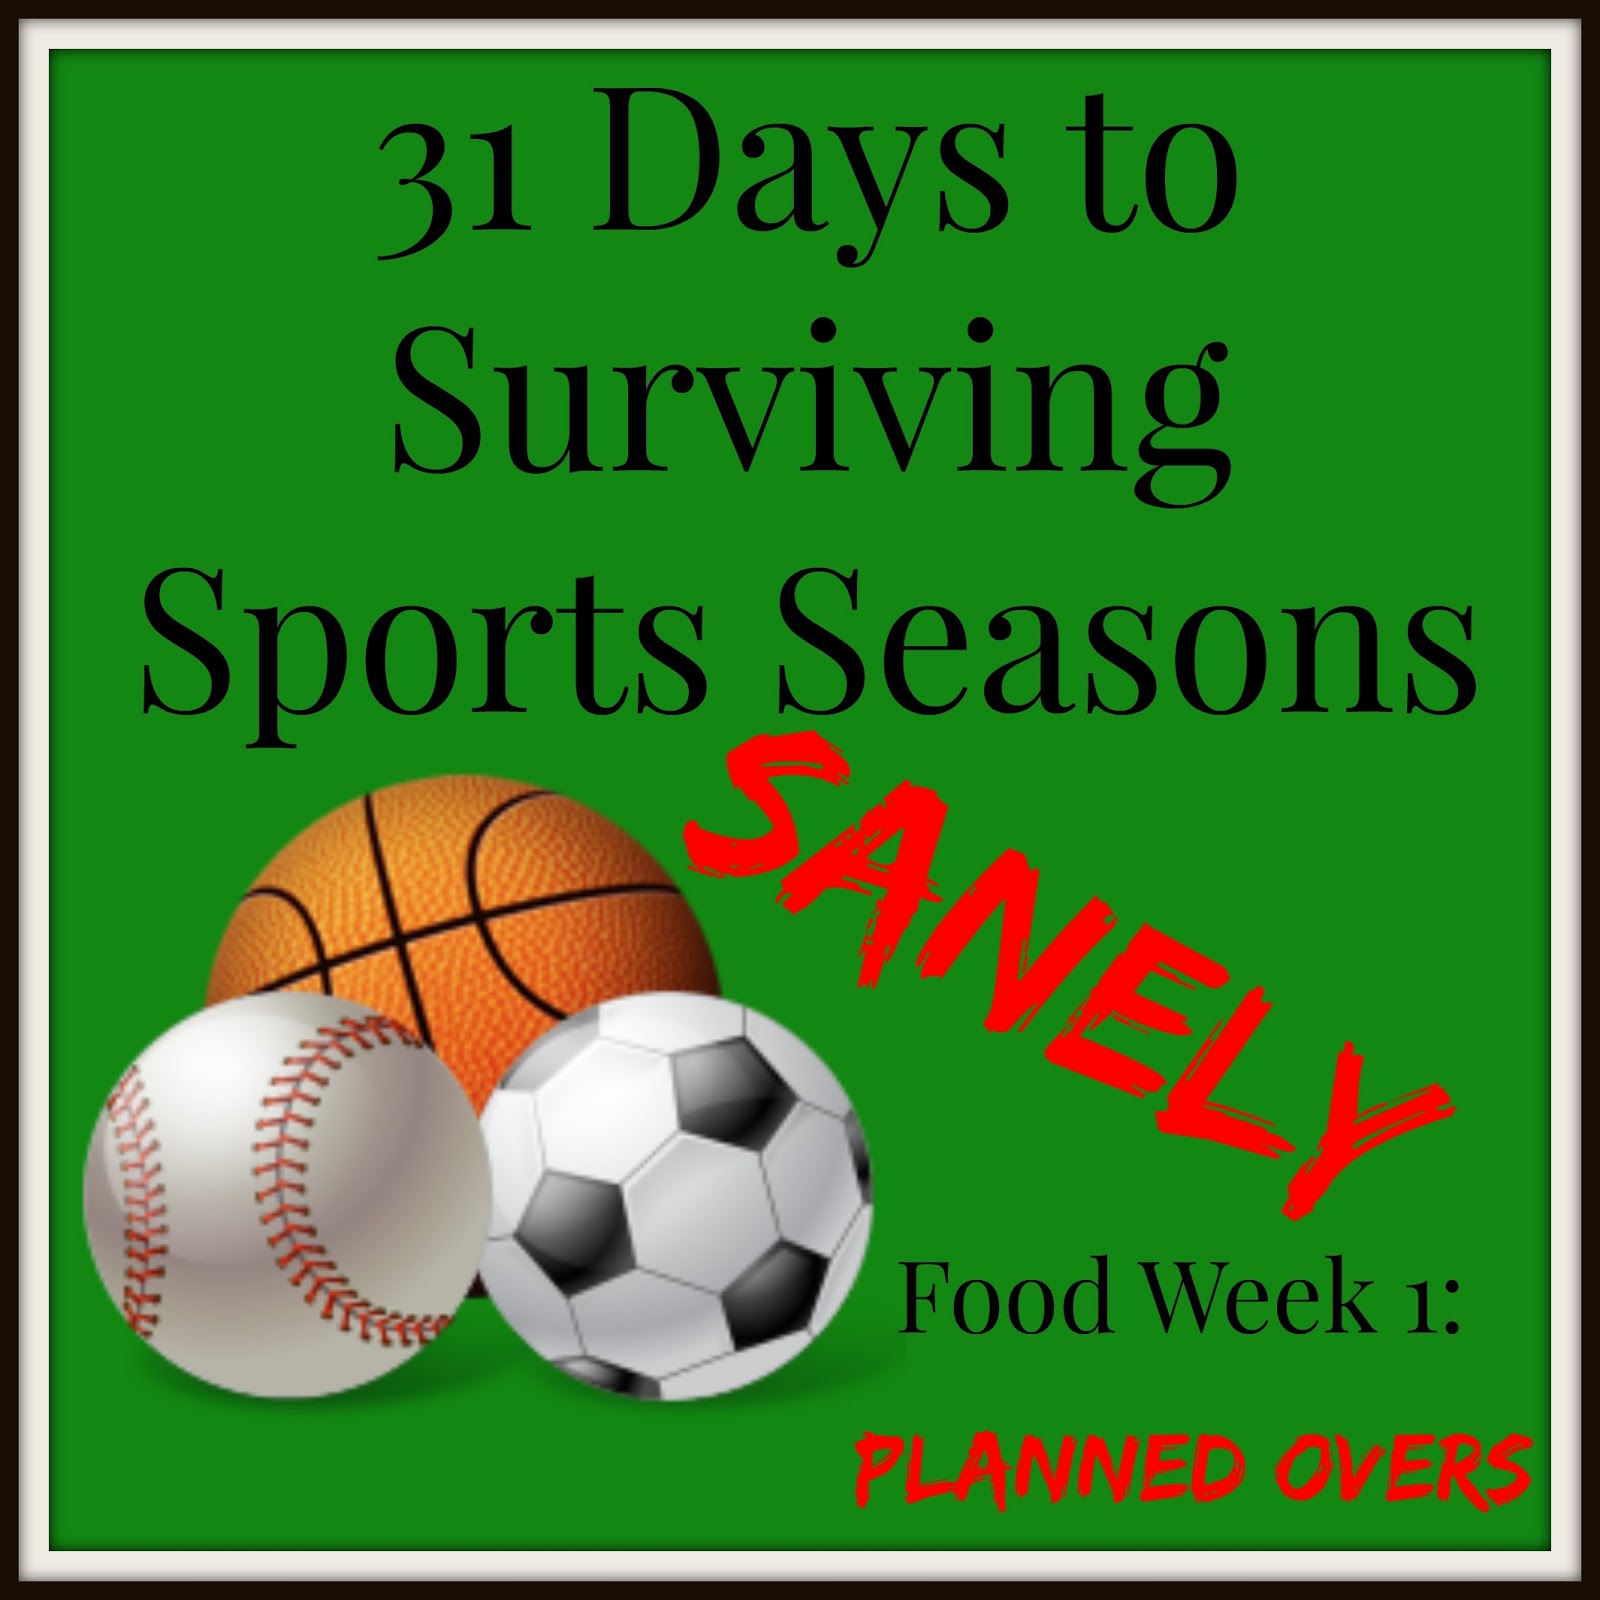 31 Days to Surviving Sports Seasons Sanely: Planned Overs